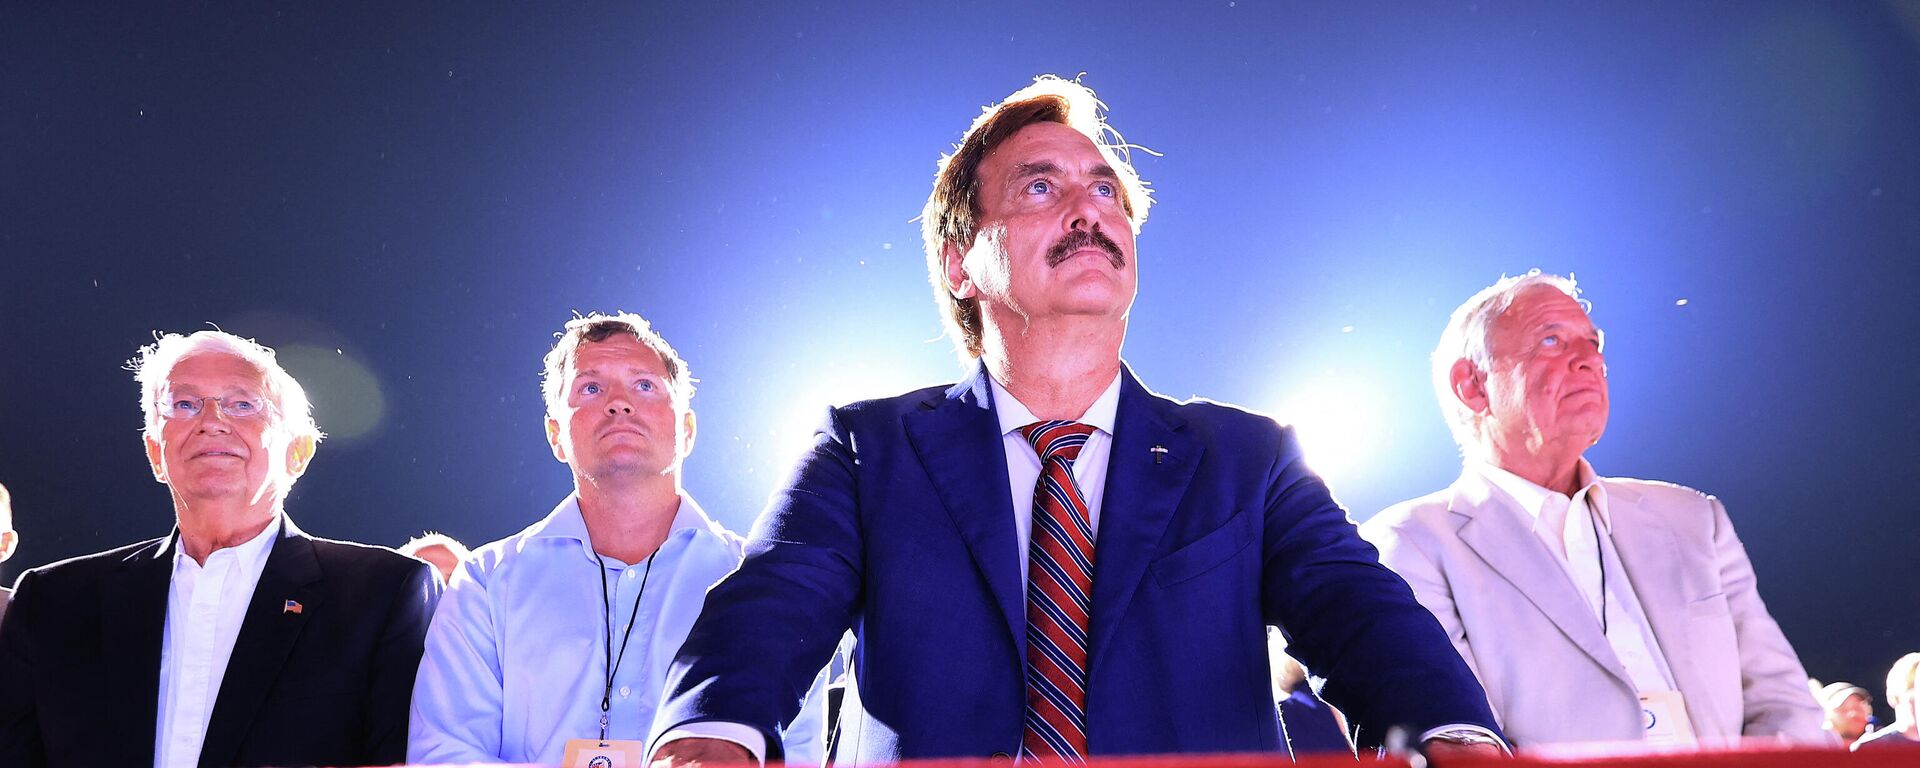 Founder and CEO of My Pillow, conservative political activist and conspiracy theorist Mike Lindell (C) listens to former U.S. President Donald Trump addresses supporters during a Save America rally at York Family Farms on August 21, 2021 in Cullman, Alabama. - Sputnik International, 1920, 06.01.2022